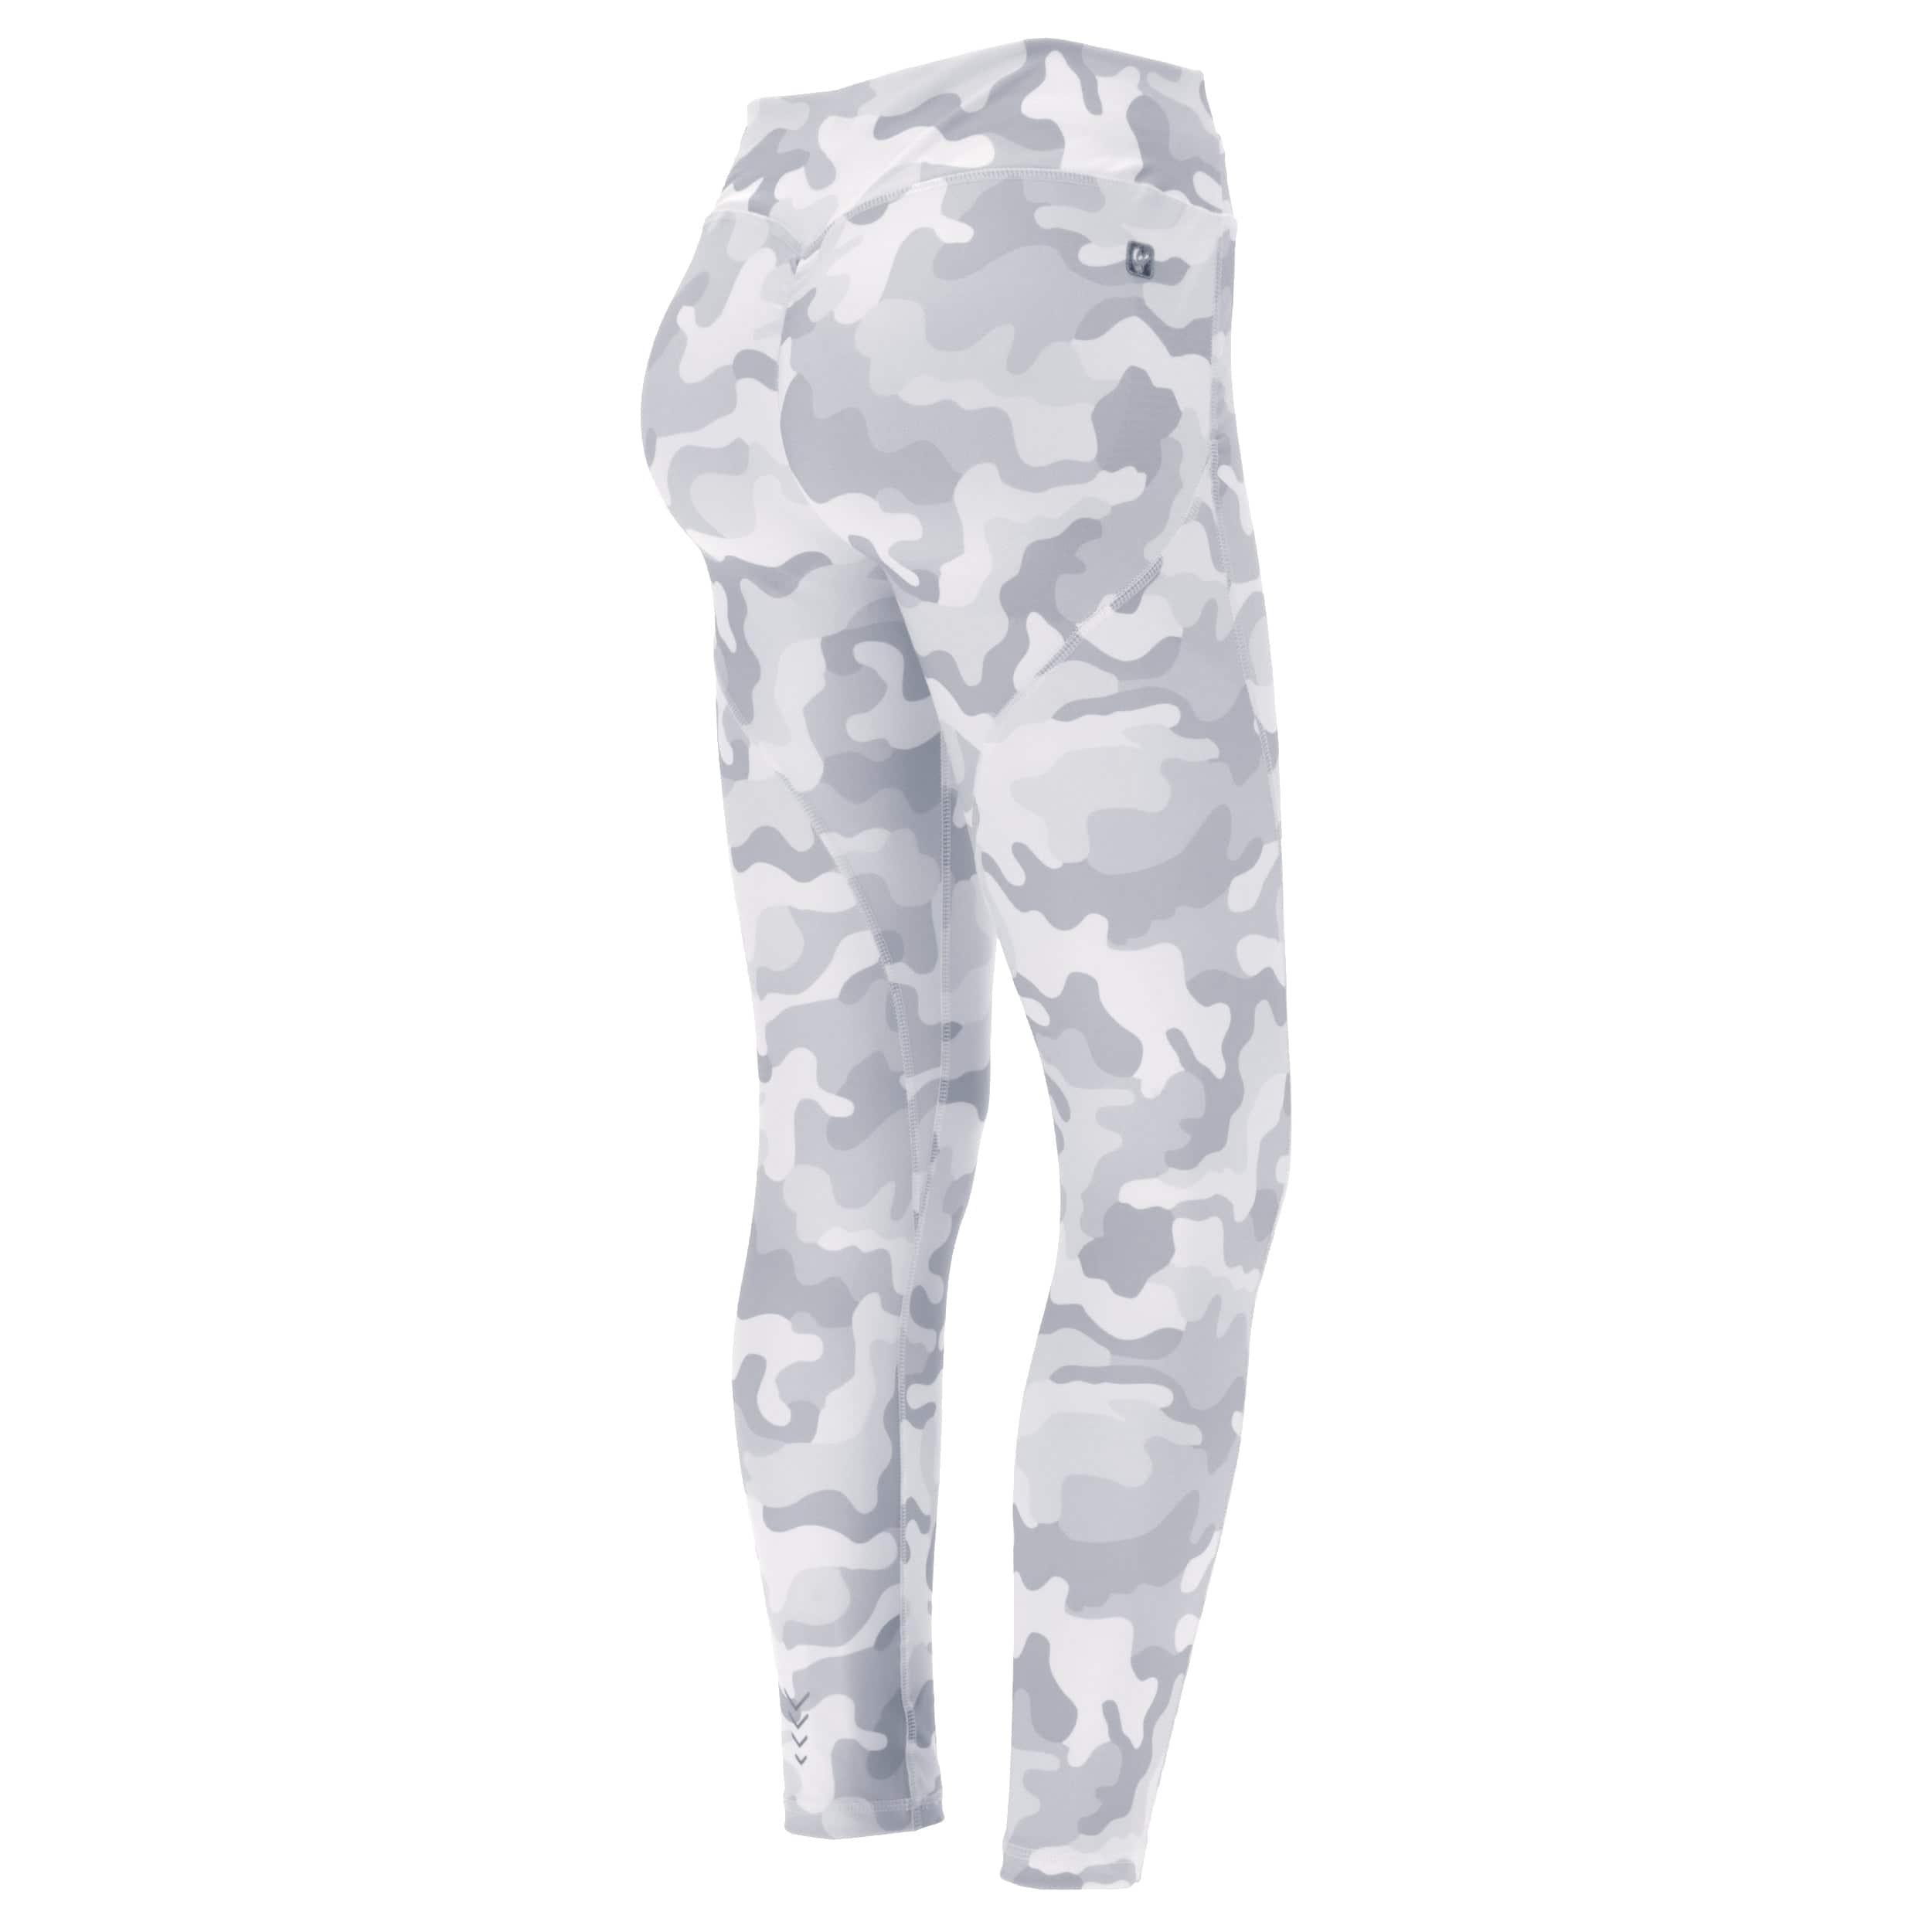 WR.UP® Sport Leggings - Mid Rise - 7/8 Length - White + Grey Camouflage 1